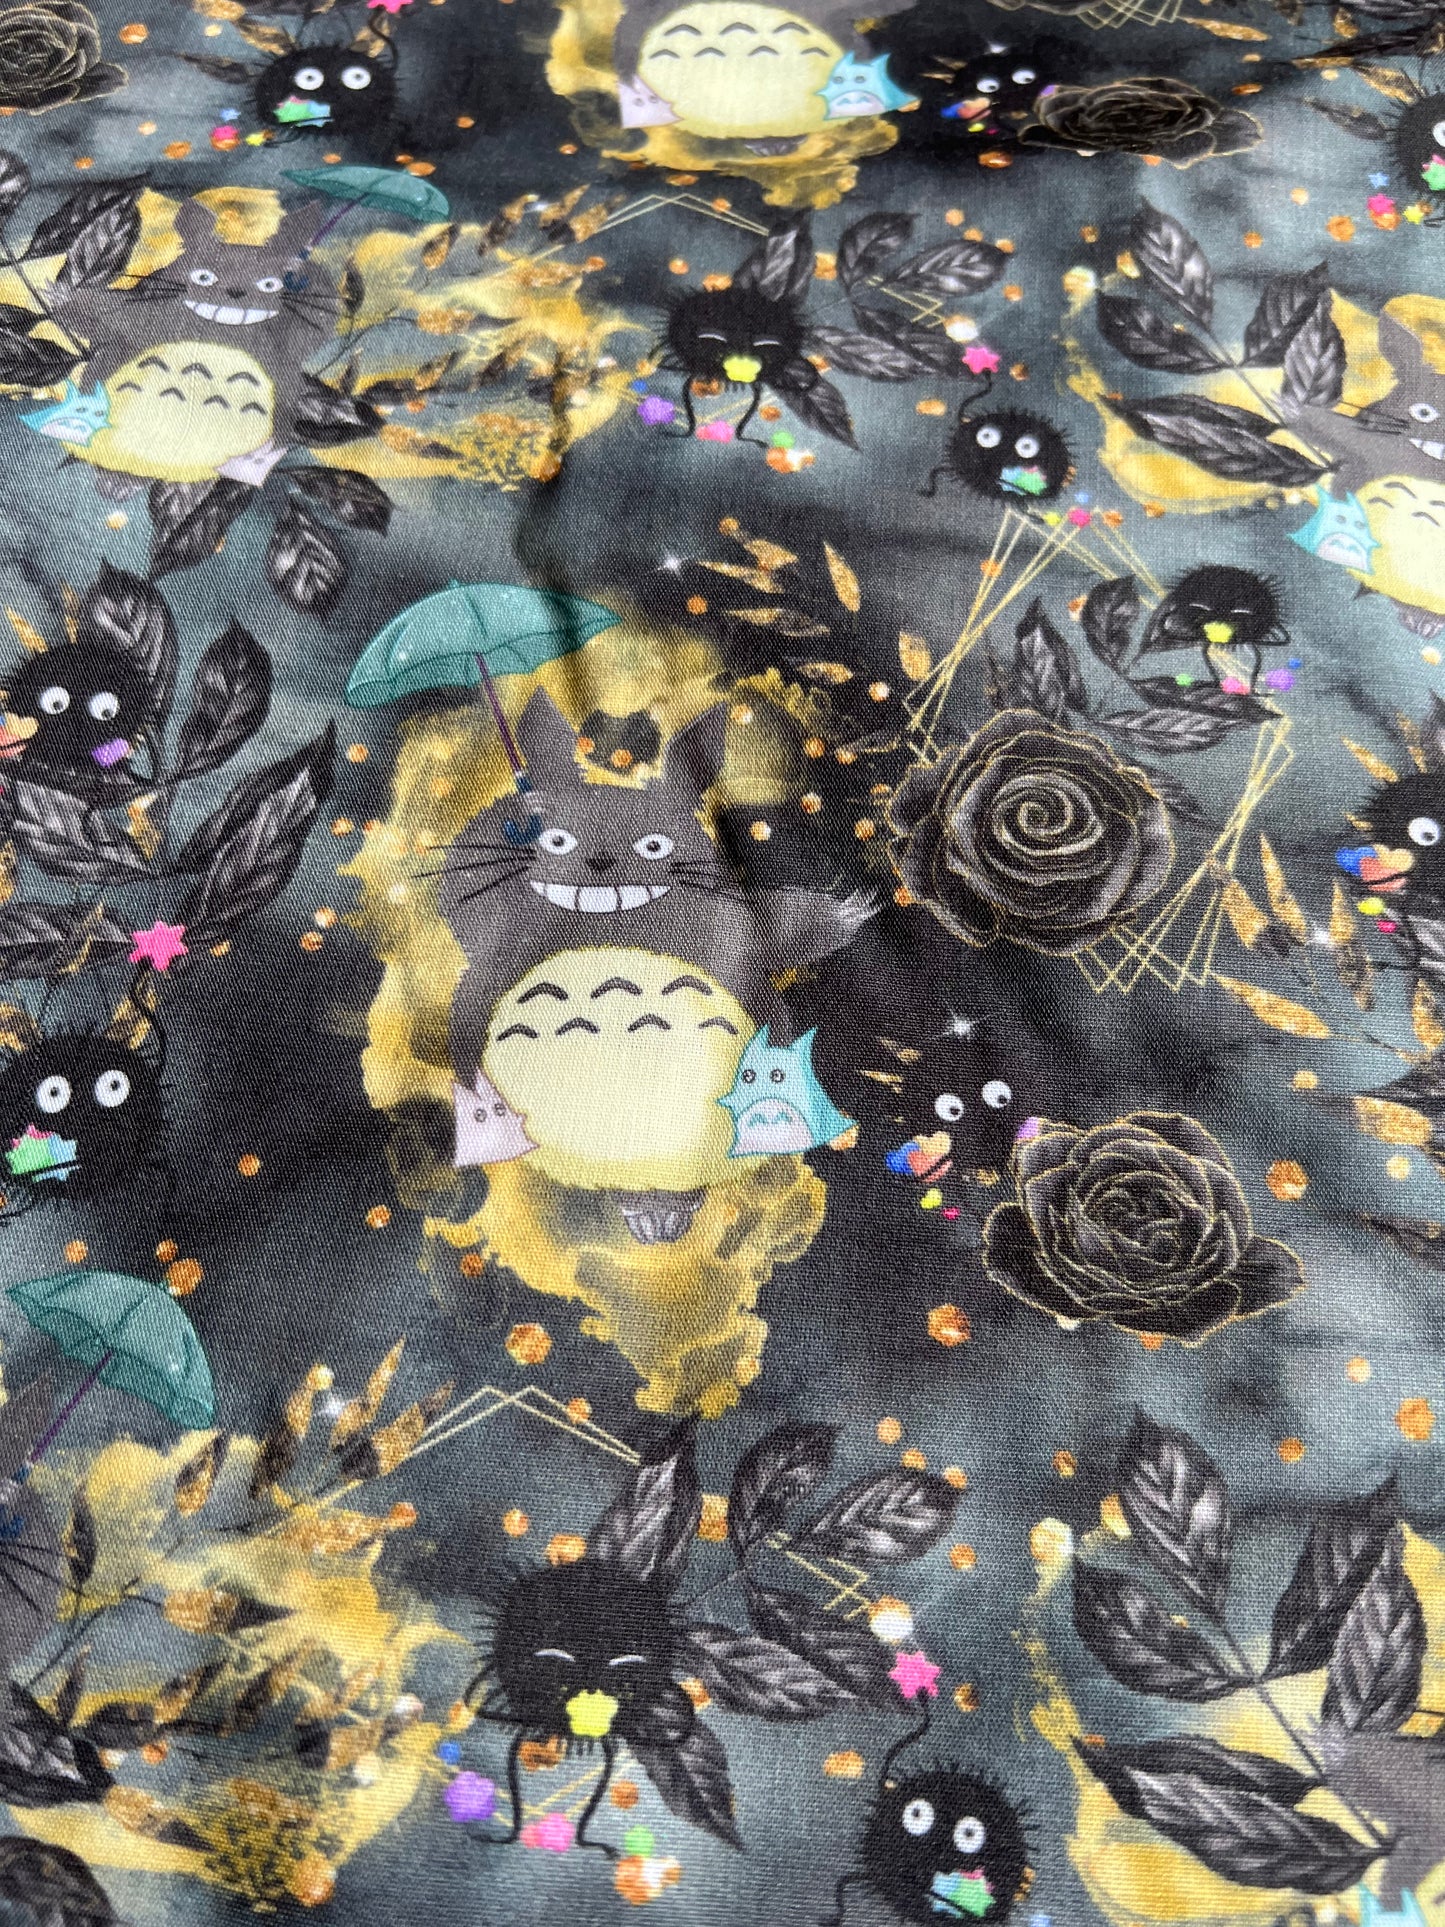 TOTORO - Polycotton Fabric from Japan